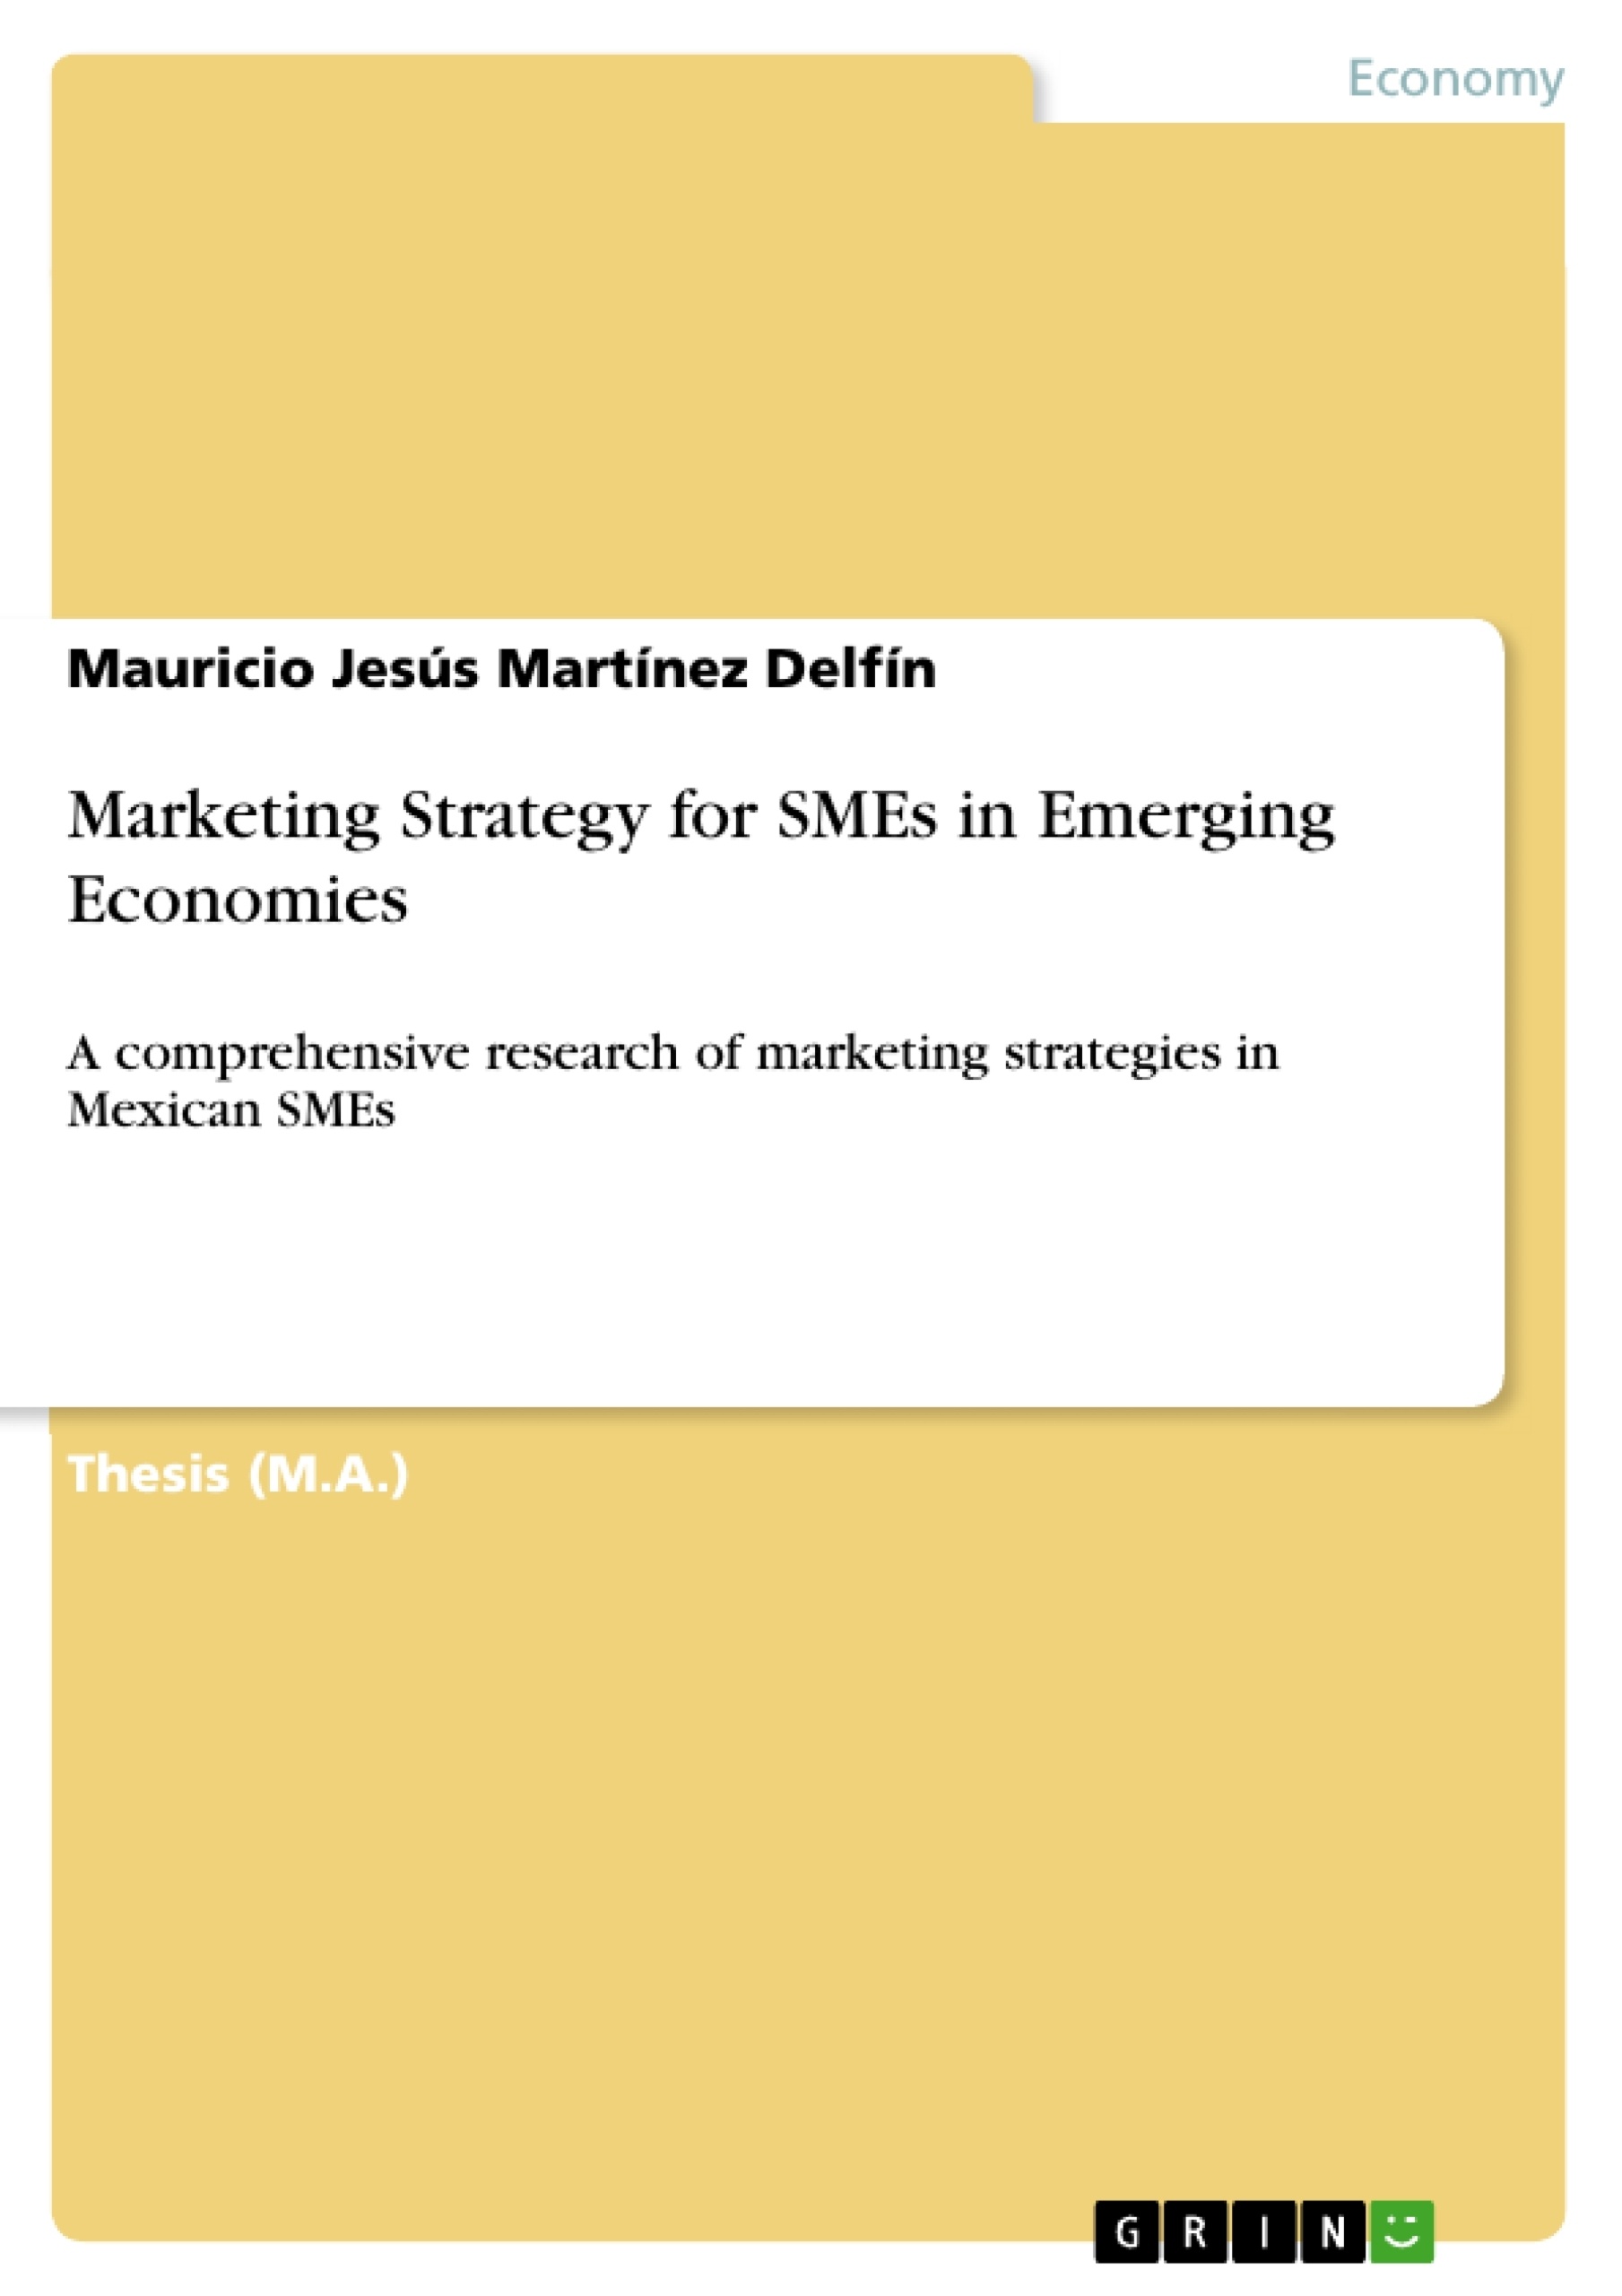 for　Economies　Marketing　Strategy　Emerging　SMEs　in　GRIN